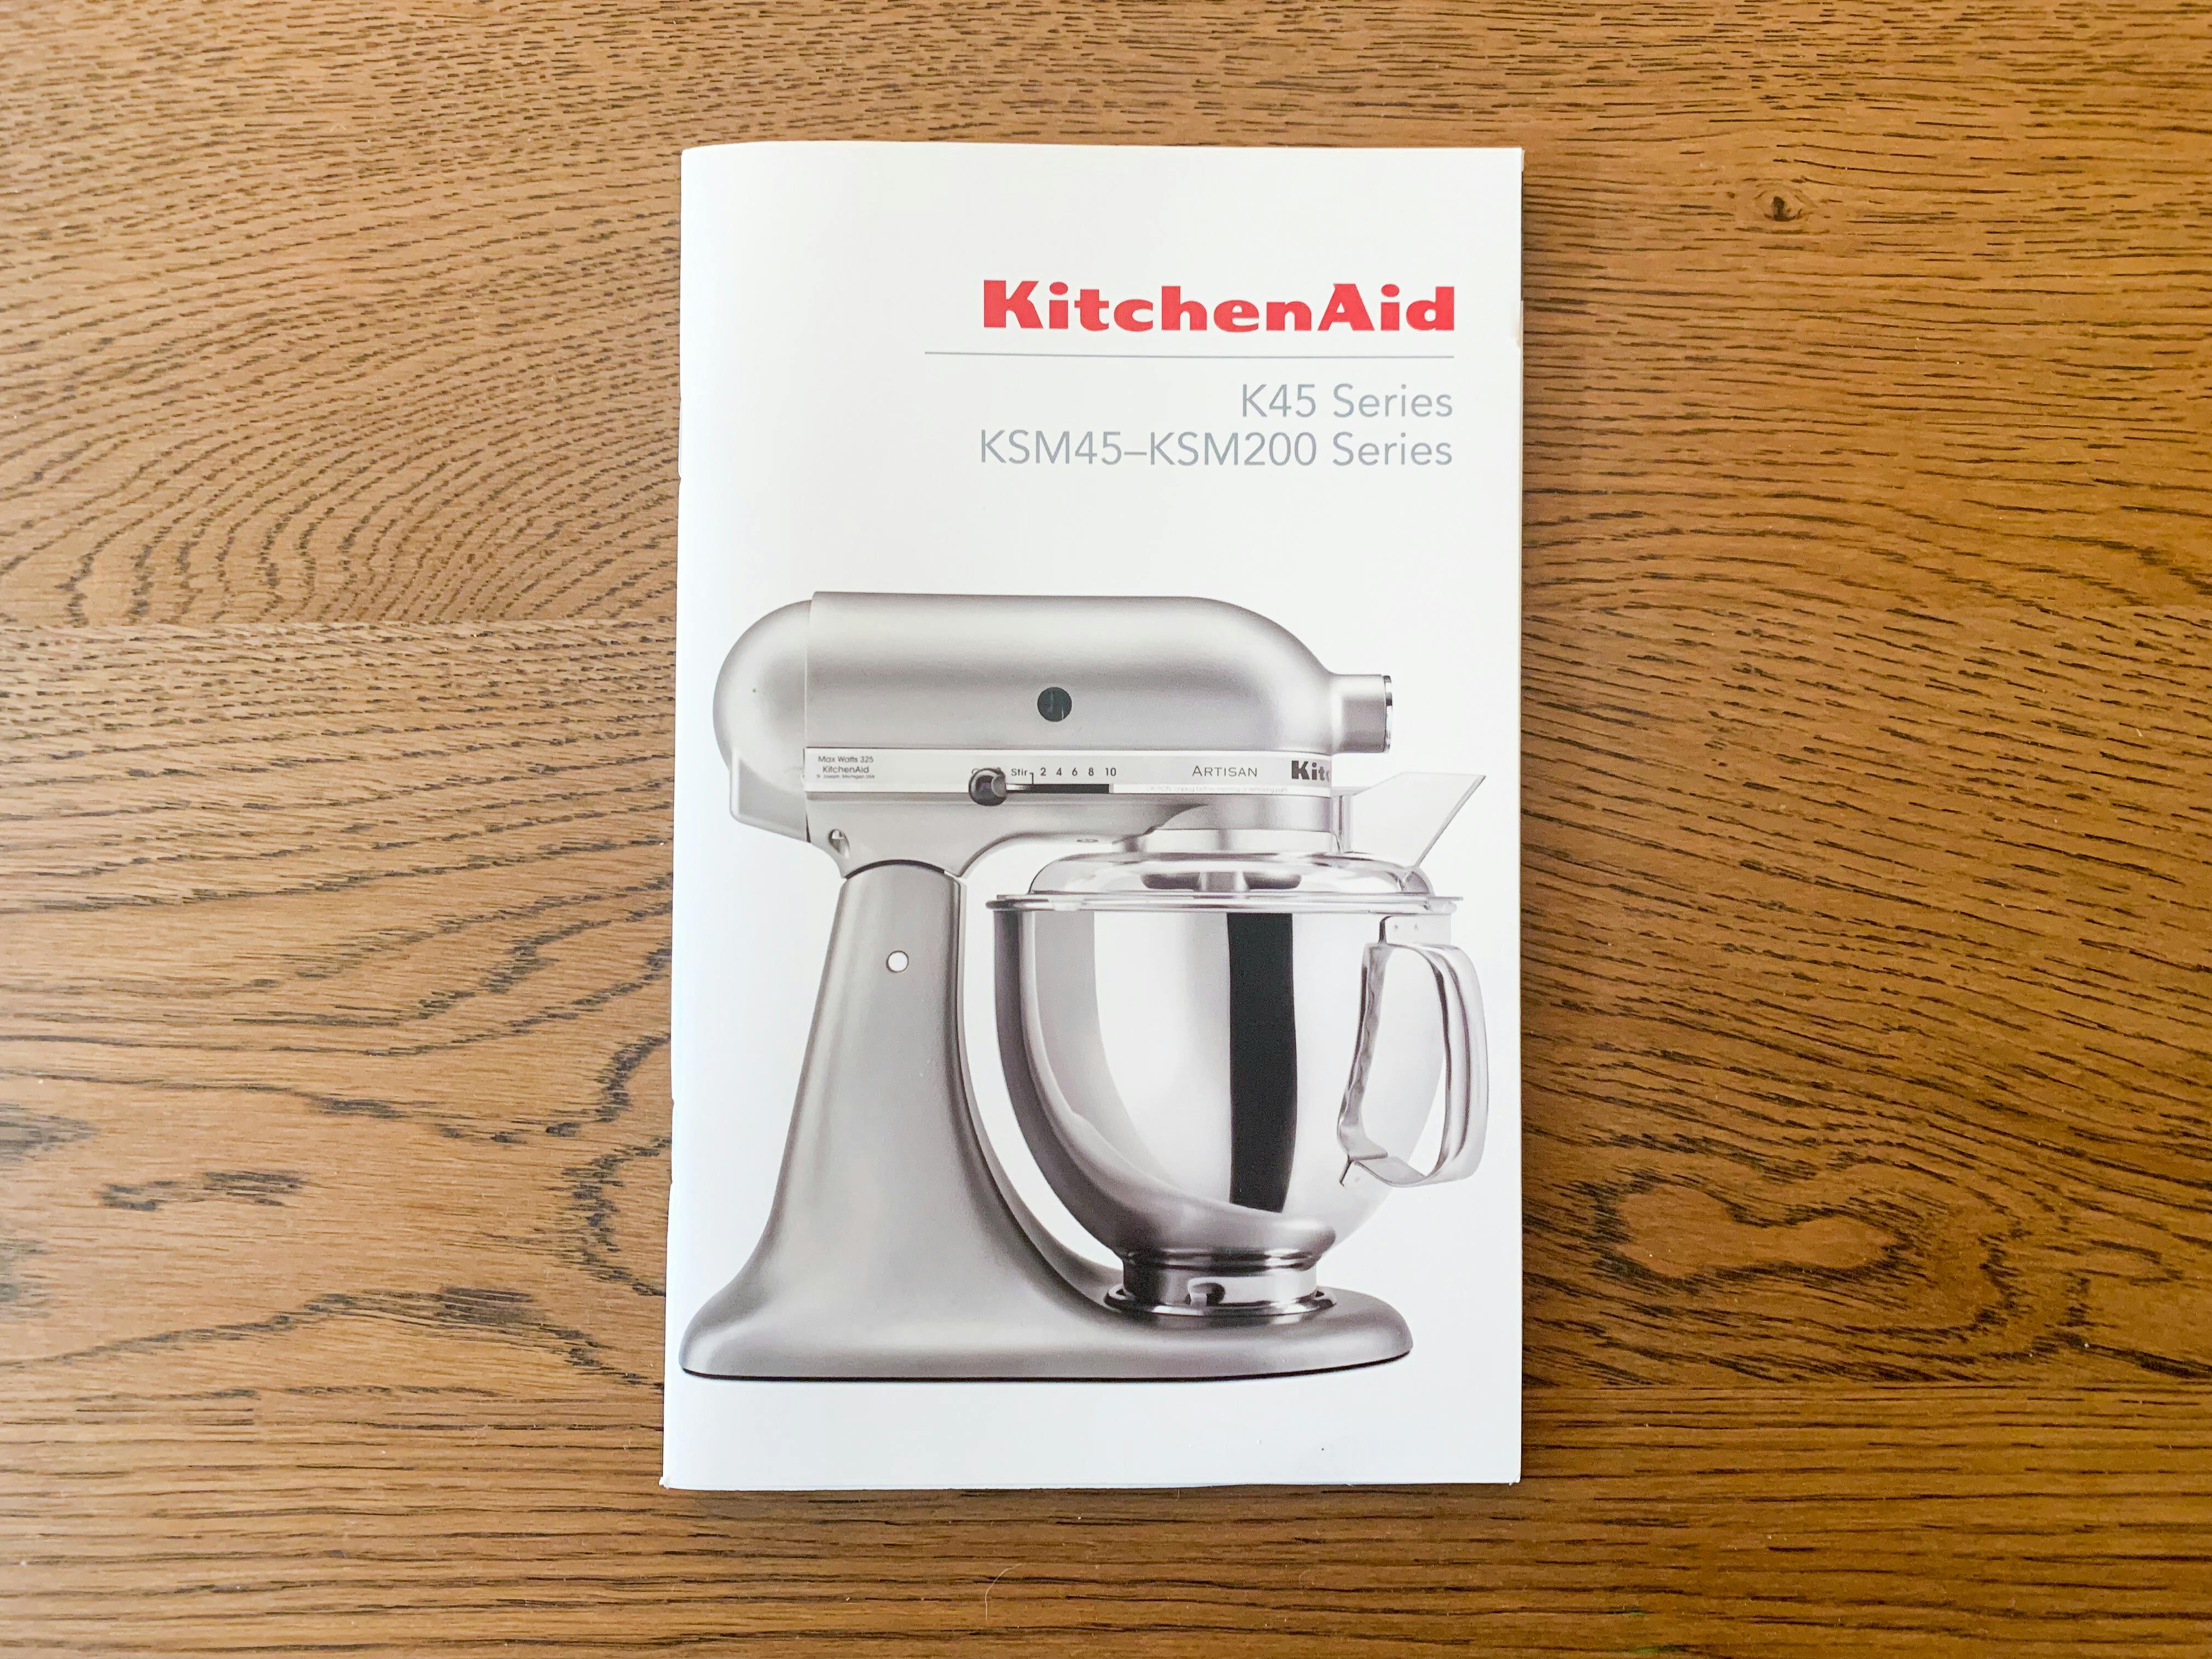 the front cover of the KitchenAid Mixer manual on a wood table